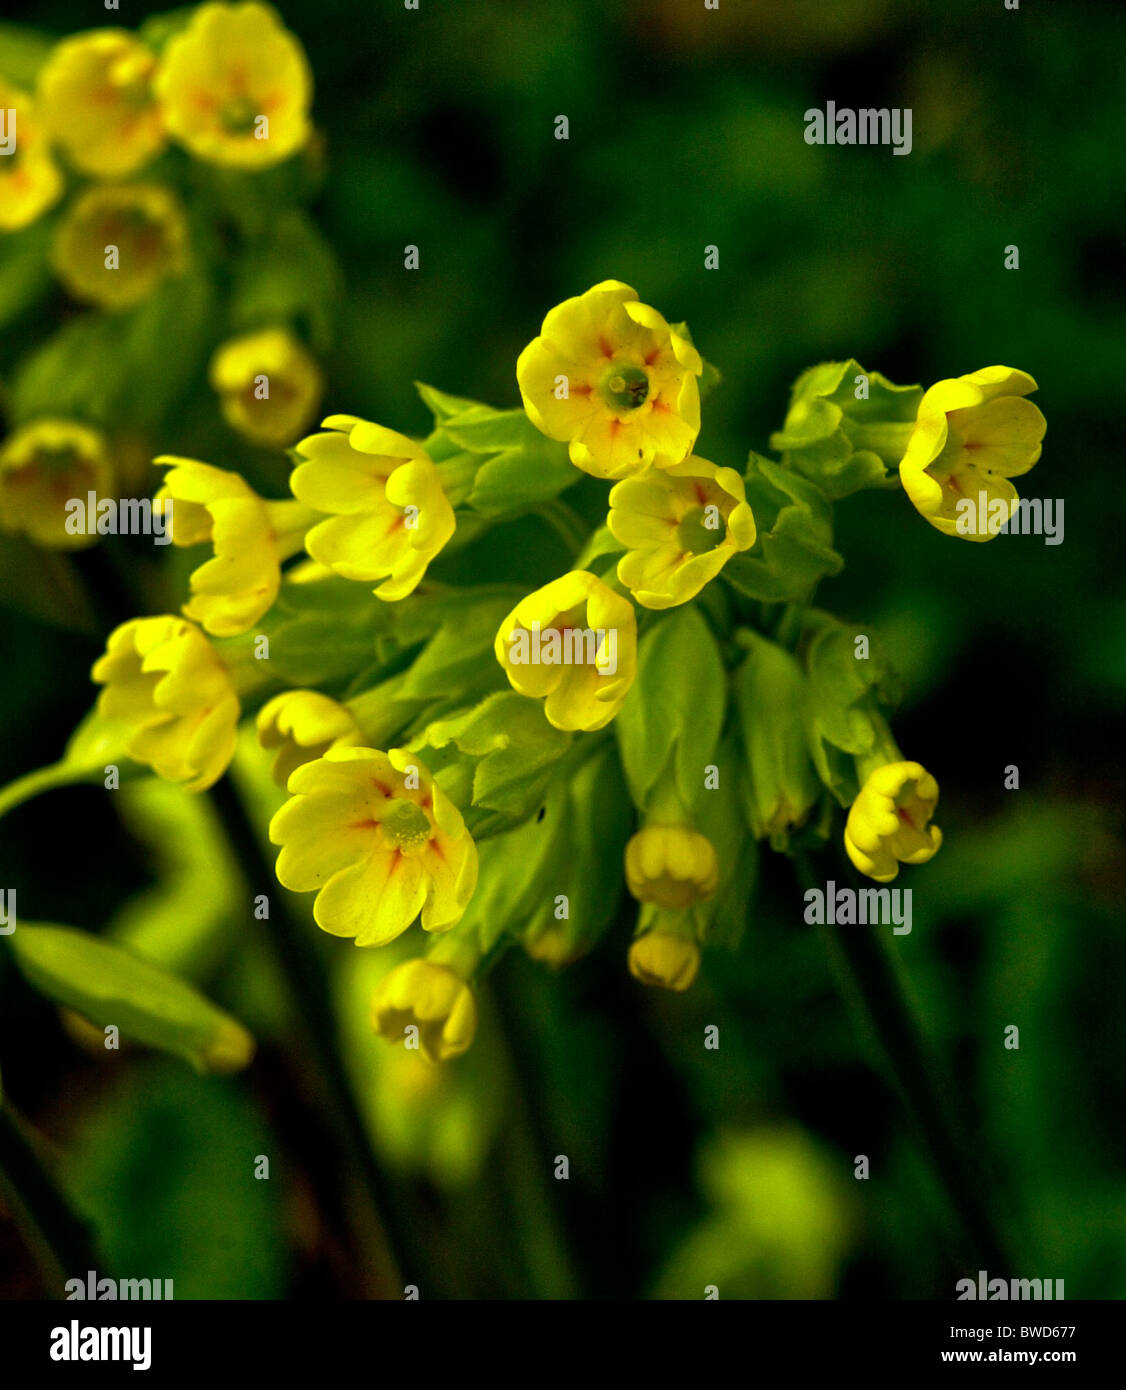 Primula veris (Cowslip; syn. Primula officinalis Hill) is a flowering plant in the genus Primula. Stock Photo